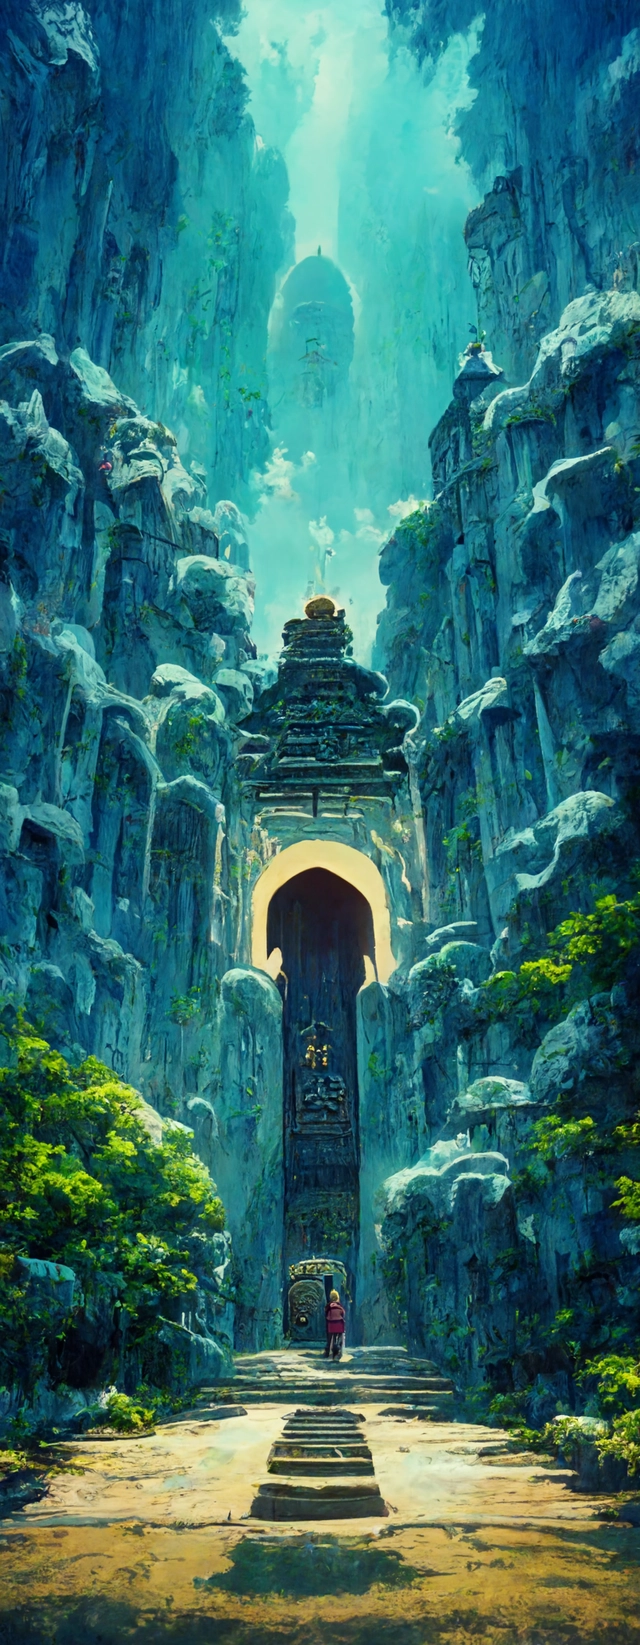 The Entrance to Kingdom of Shangri-La, Beautiful architecture, Atmosphere, Dramatic lighting, Epic composition, Close up, Low angle, Wide angle, by Miyazaki, Nausicaa Ghibli, Breath of The Wild